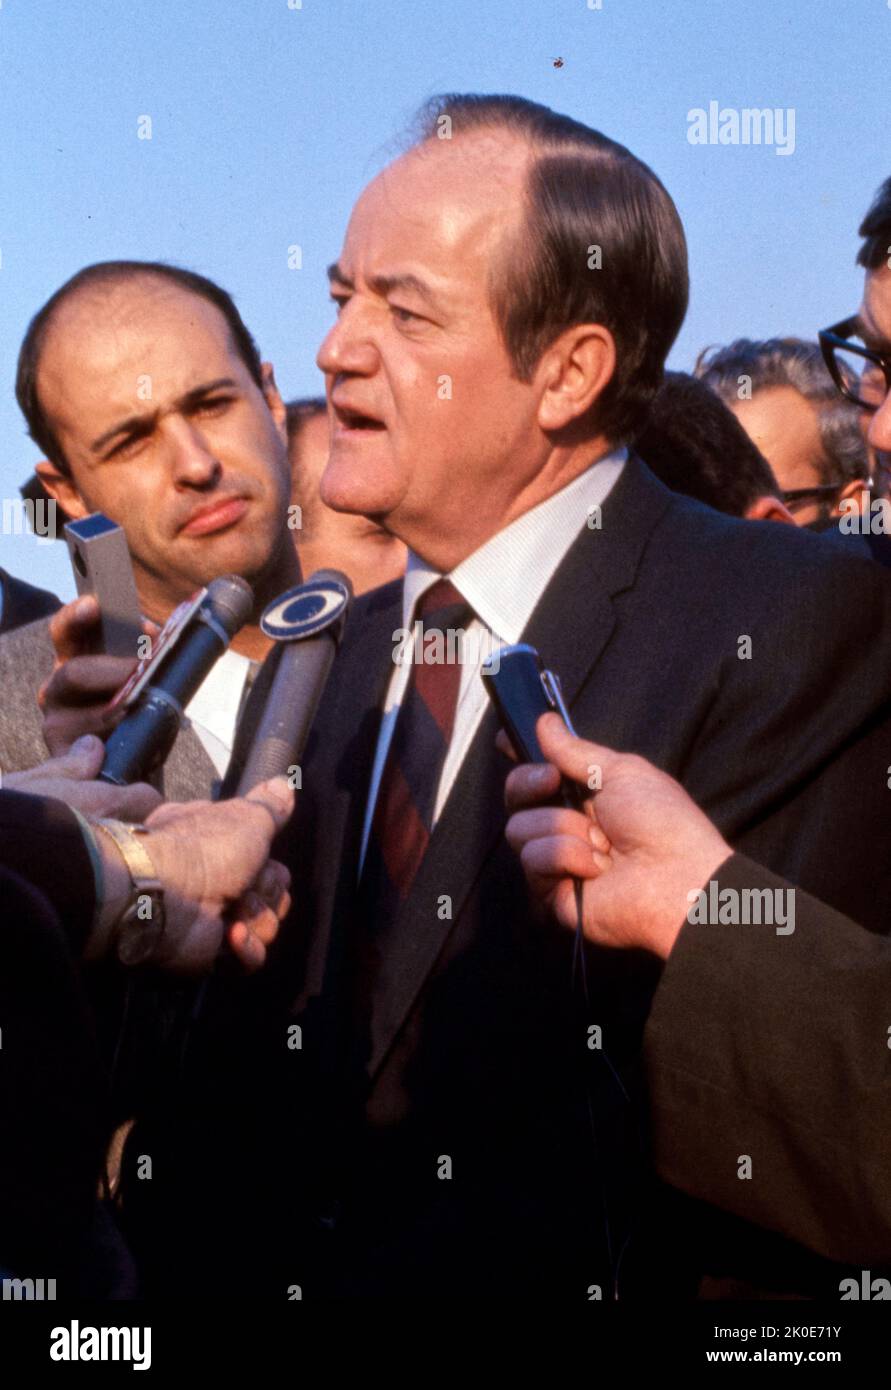 Hubert Humphrey (1911 - 1978) American politician who served as the 38th vice president of the United States from 1965 to 1969. He twice served in the United States Senate, representing Minnesota from 1949 to 1964 and 1971 to 1978. The Democratic Party nominated him in the 1968 presidential election. He lost the election to Republican nominee Richard Nixon. Stock Photo